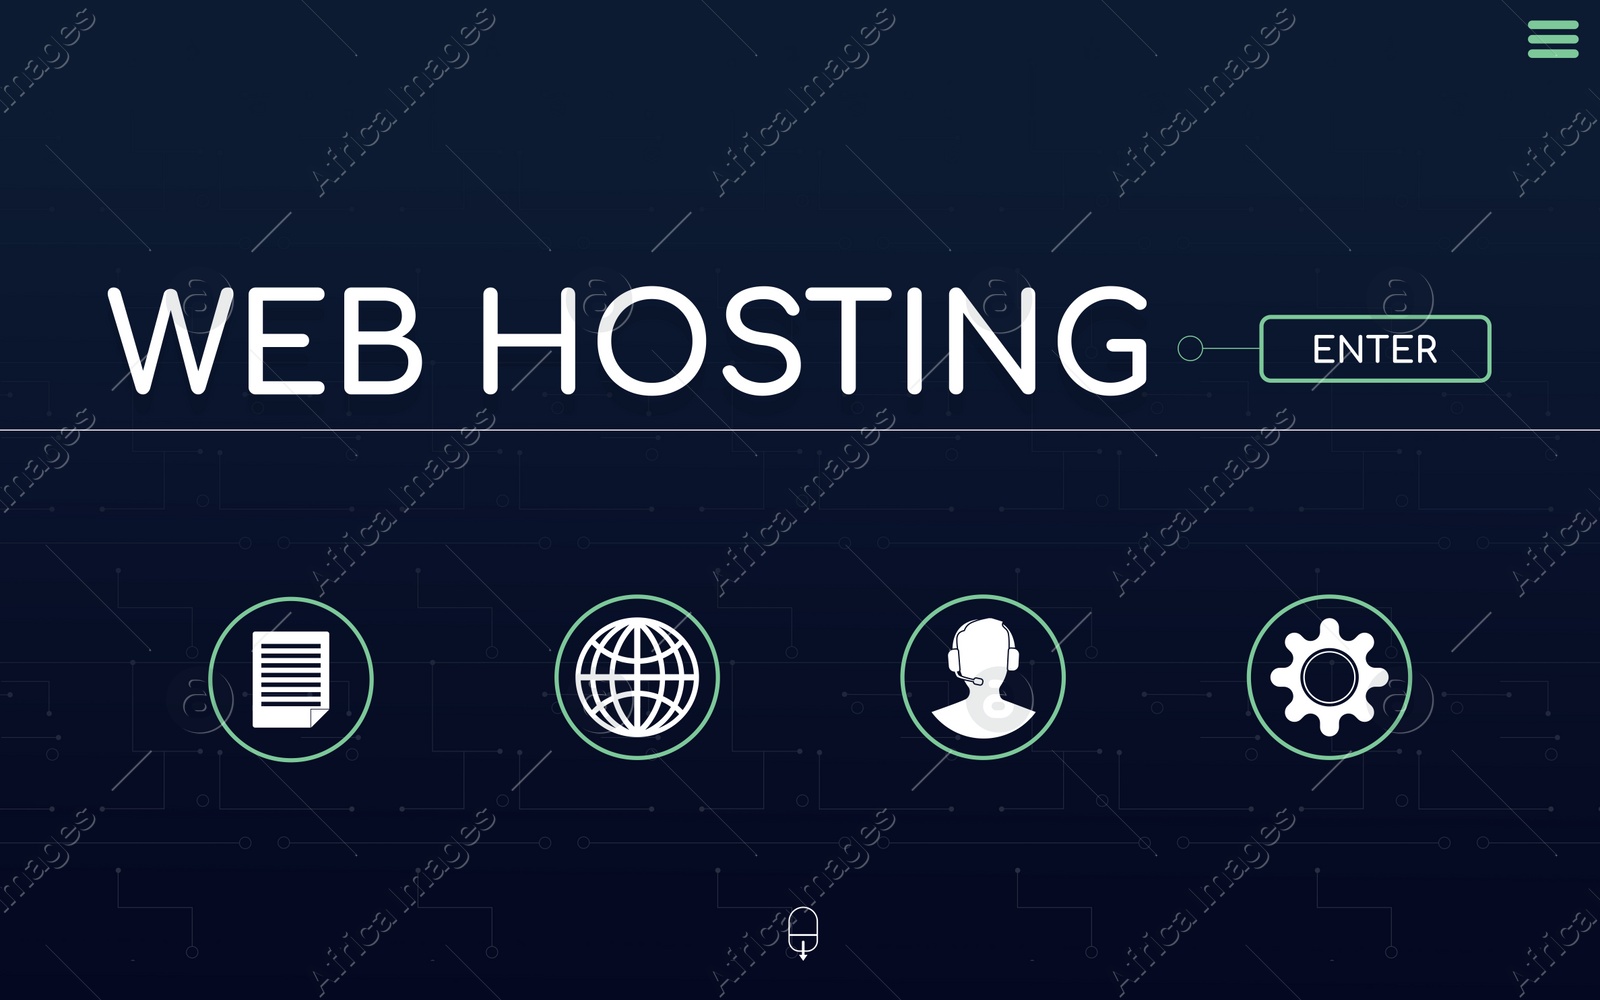 Illustration of Web hosting service. Homepage with different icons, illustration